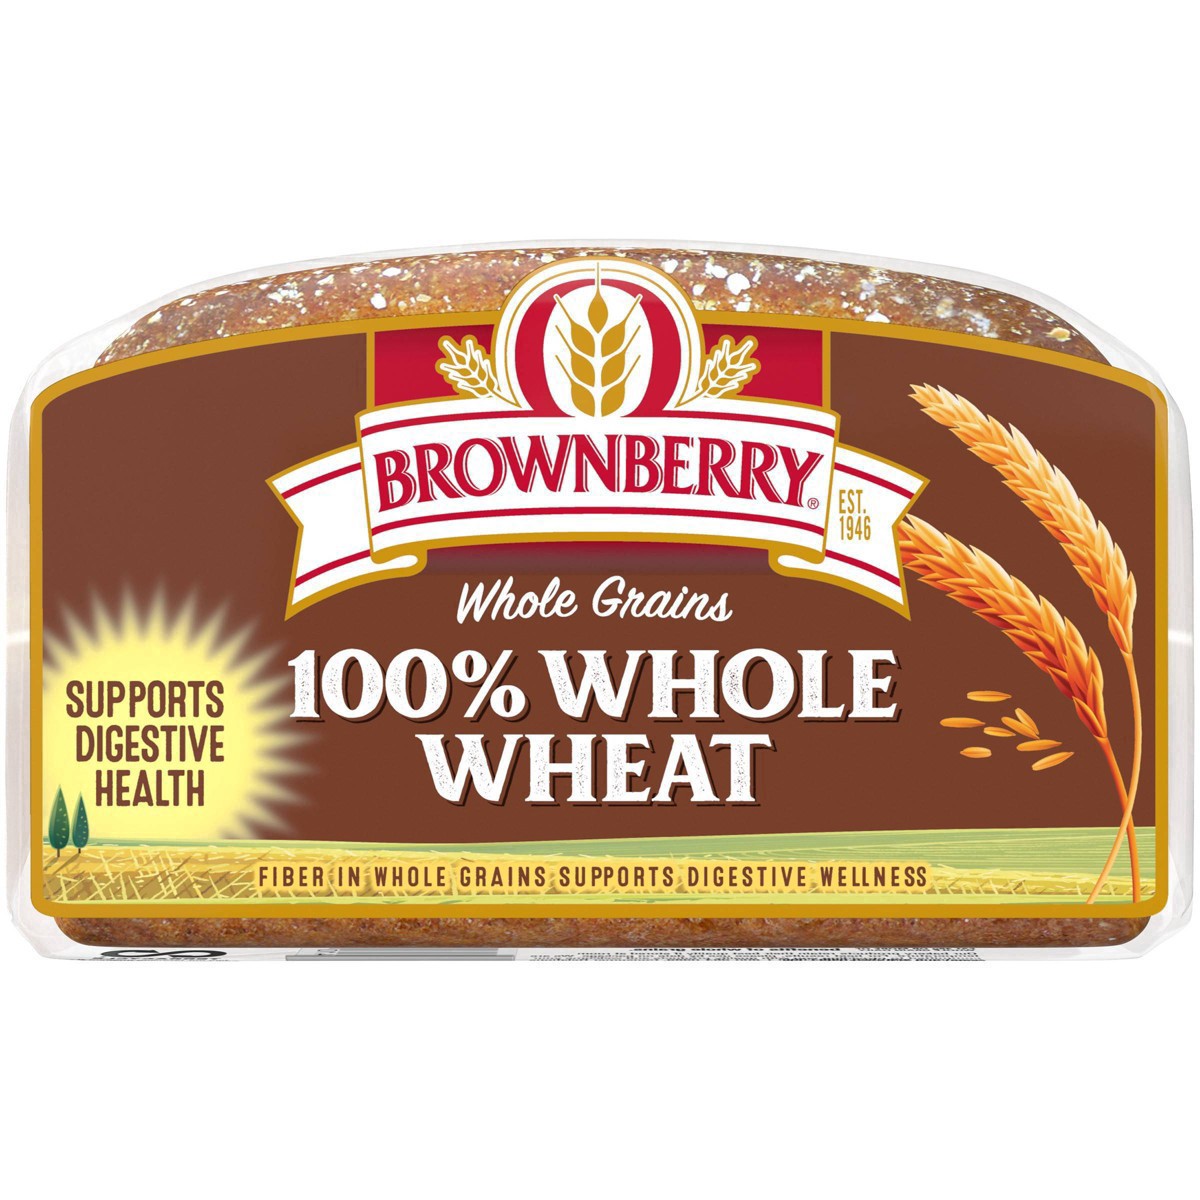 slide 20 of 23, Brownberry Whole Grains 100% Whole Wheat Bread, 24 oz, 1 ct